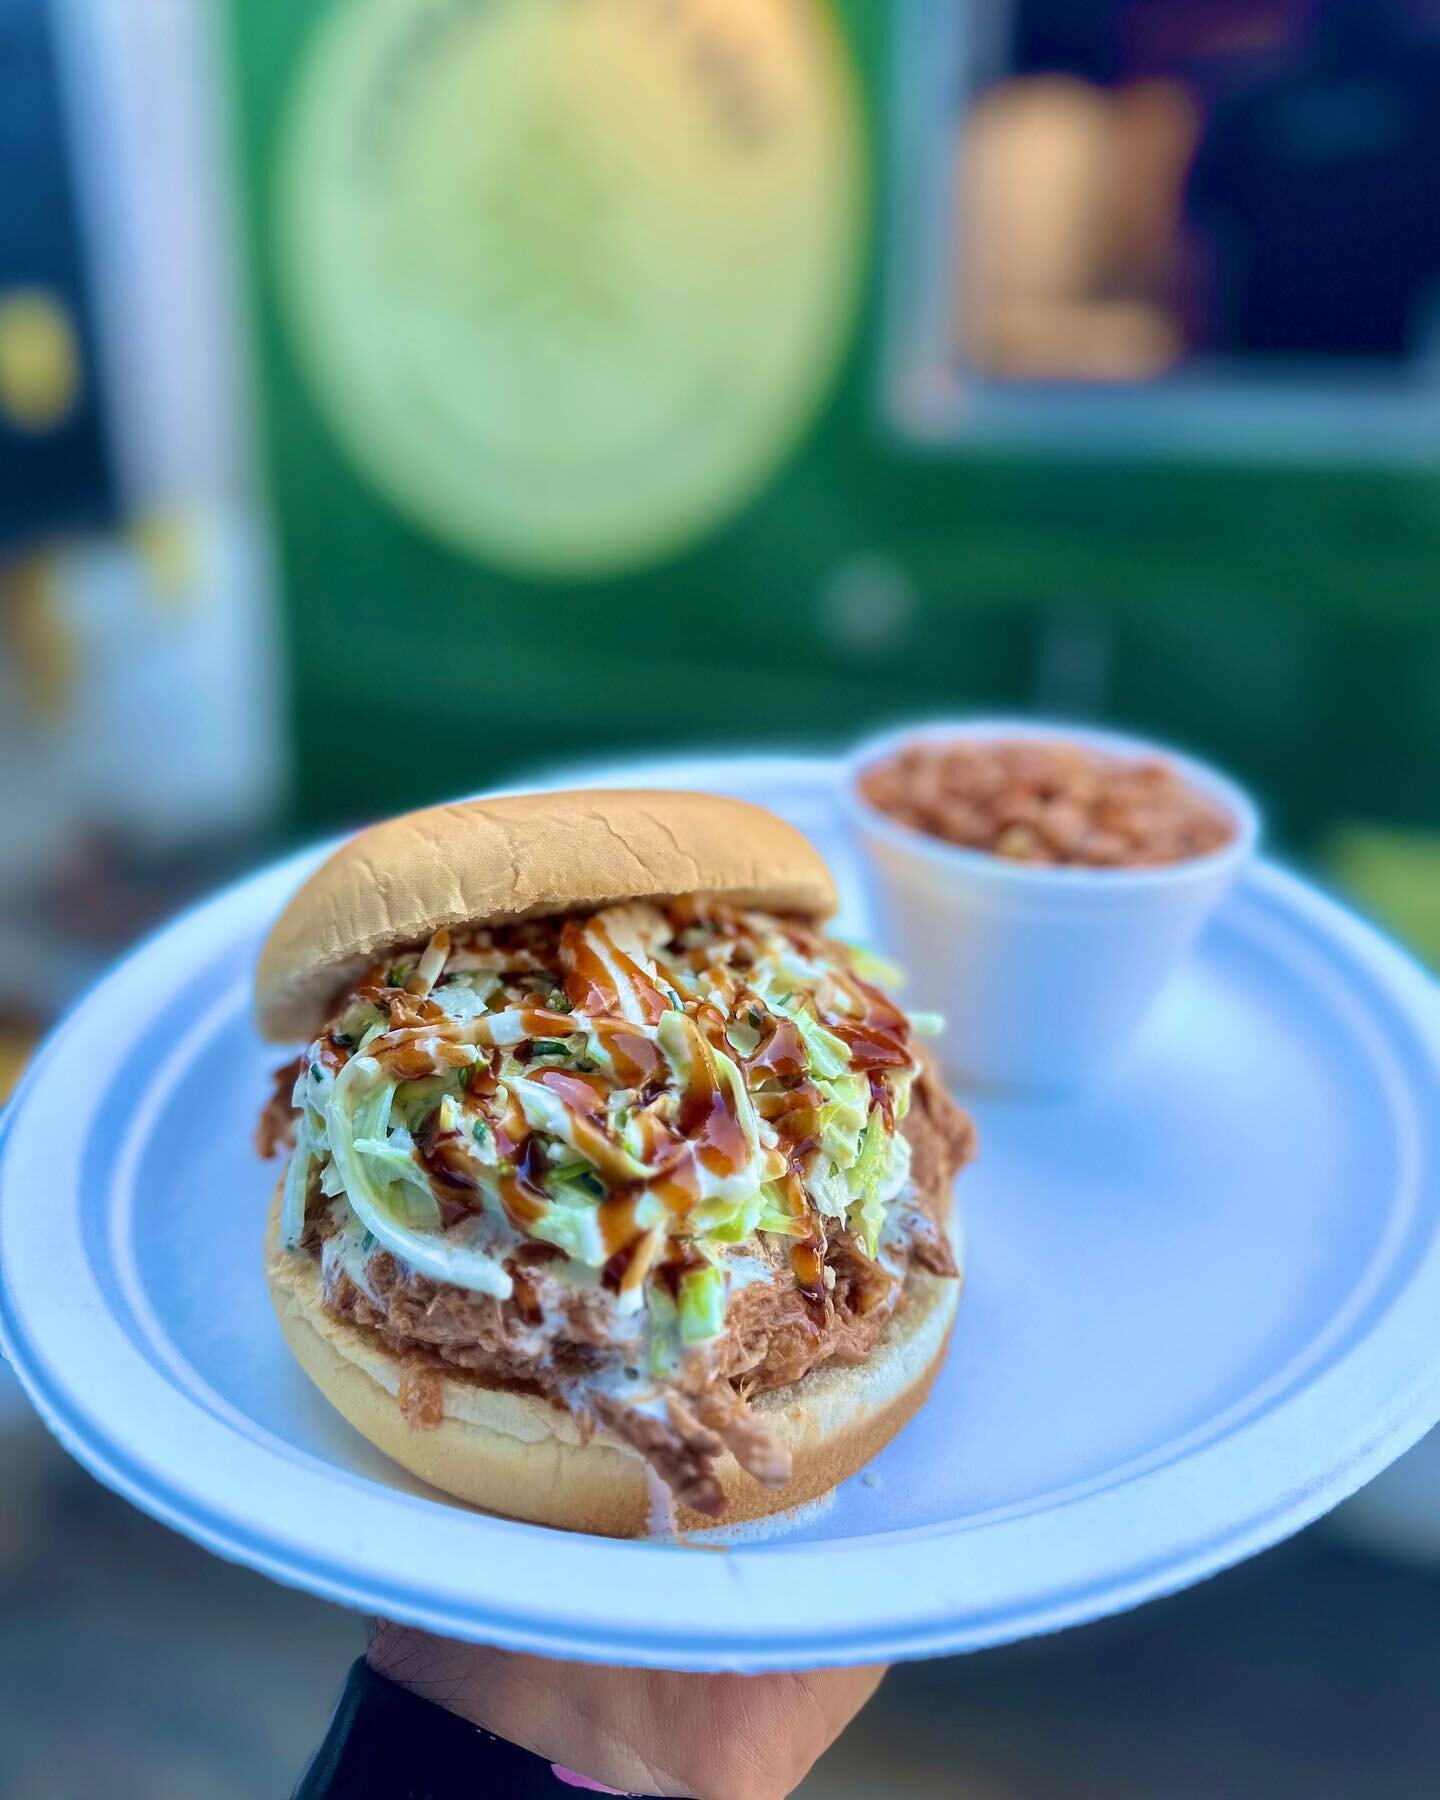 BBQ Pulled Pork makes every day better! 

#dallasbbq #dallasfoodtrucks #foodtruck #dallaspulledpork #pulledpork #lakehighlands #lheats